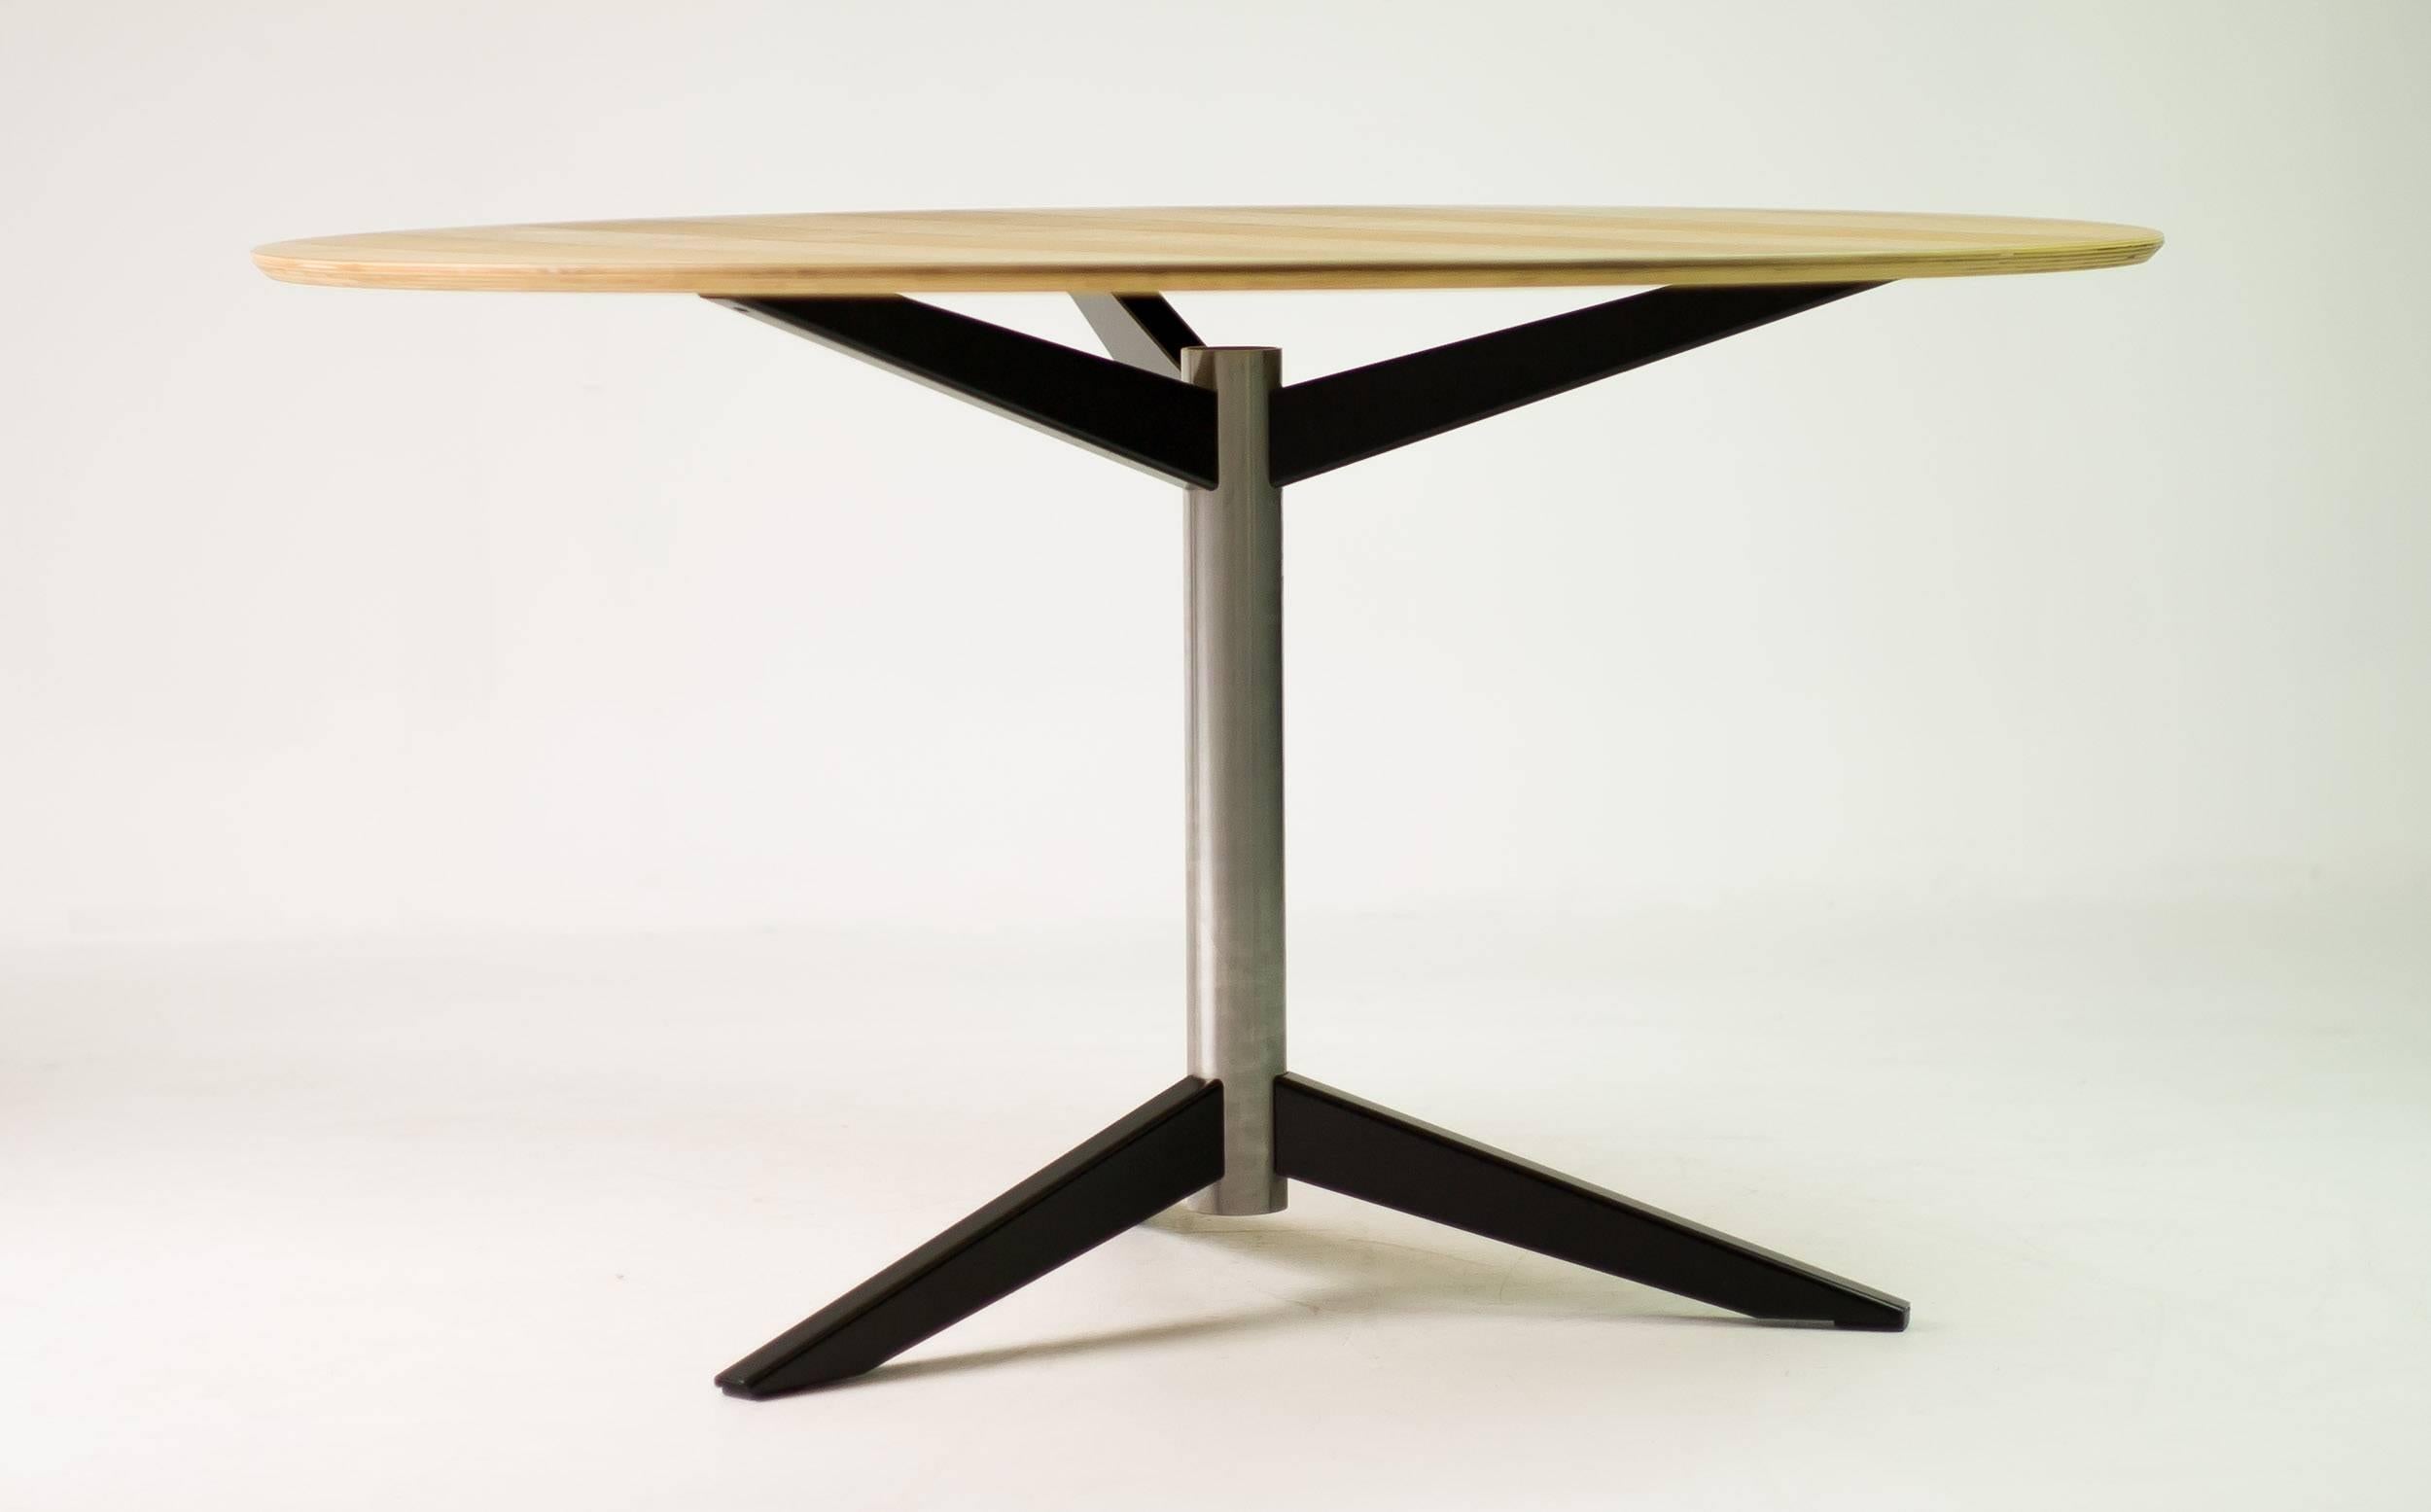 Nearly new walnut topped dining table with brushed chrome steel base and black enameled steel feet. Model TE06, designed by Martin Visser for 't Spectrum, Netherlands in 1960.

Excellent fast and affordable worldwide shipping.
White glove